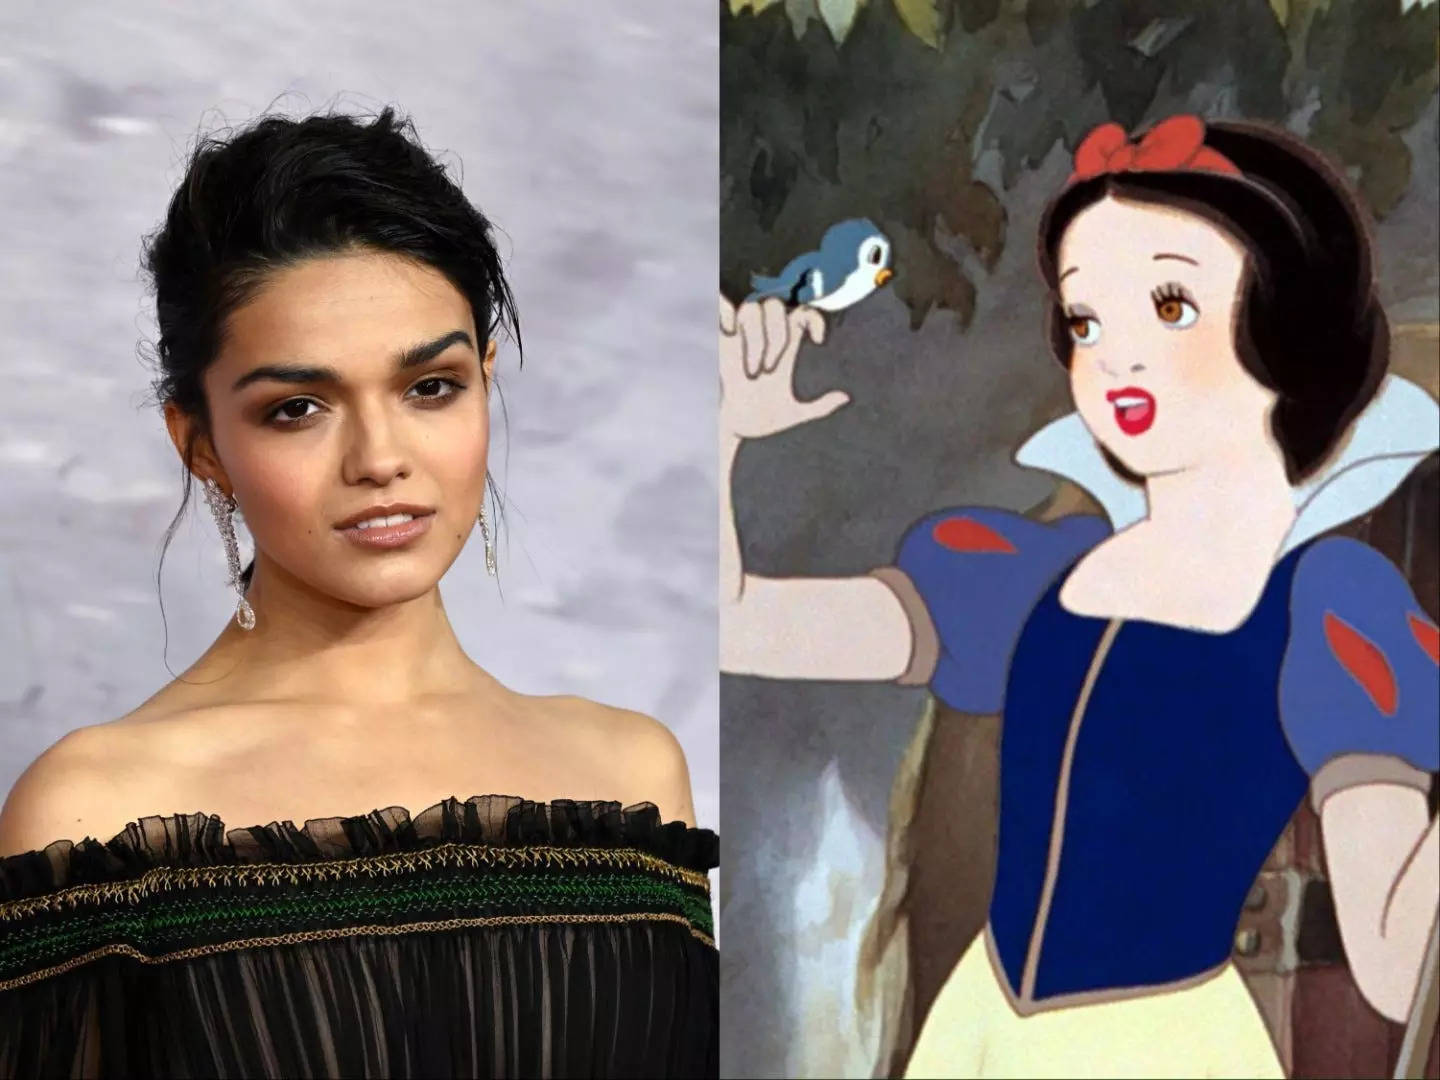 Everything You Need To Know About Disneys Controversial New Snow White Movie 